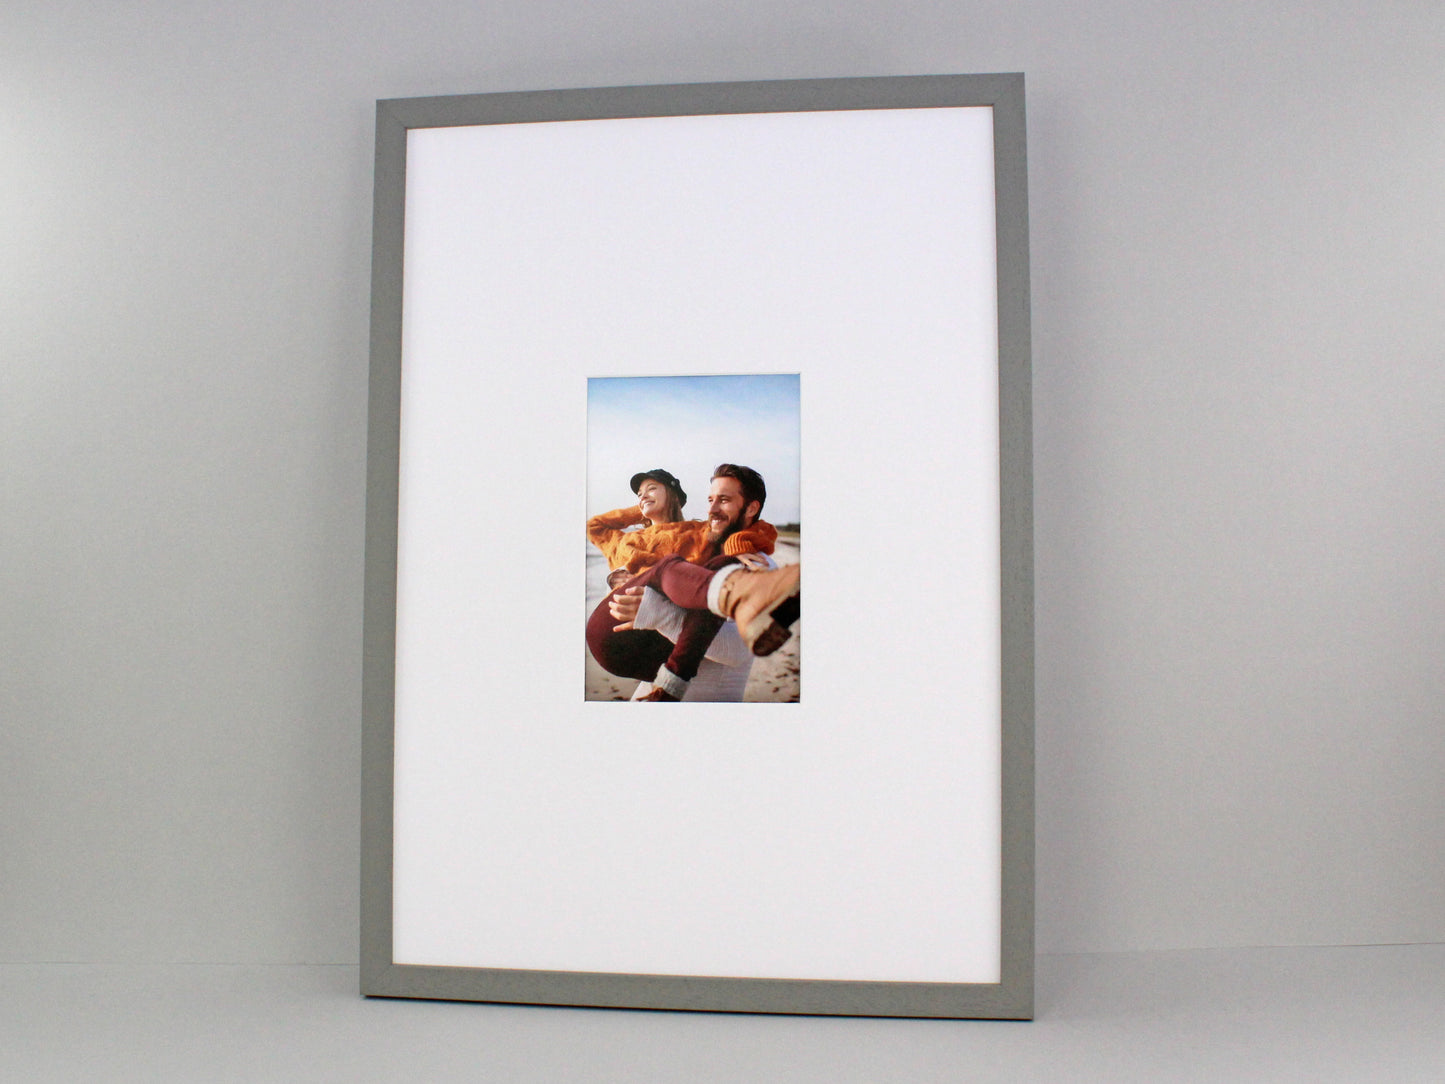 Wedding Signing Frames. A2 /42 x 59.4cm.With 8x6" Aperture for personalised Name/Quote or for a Photo. Handmade by Art@Home.